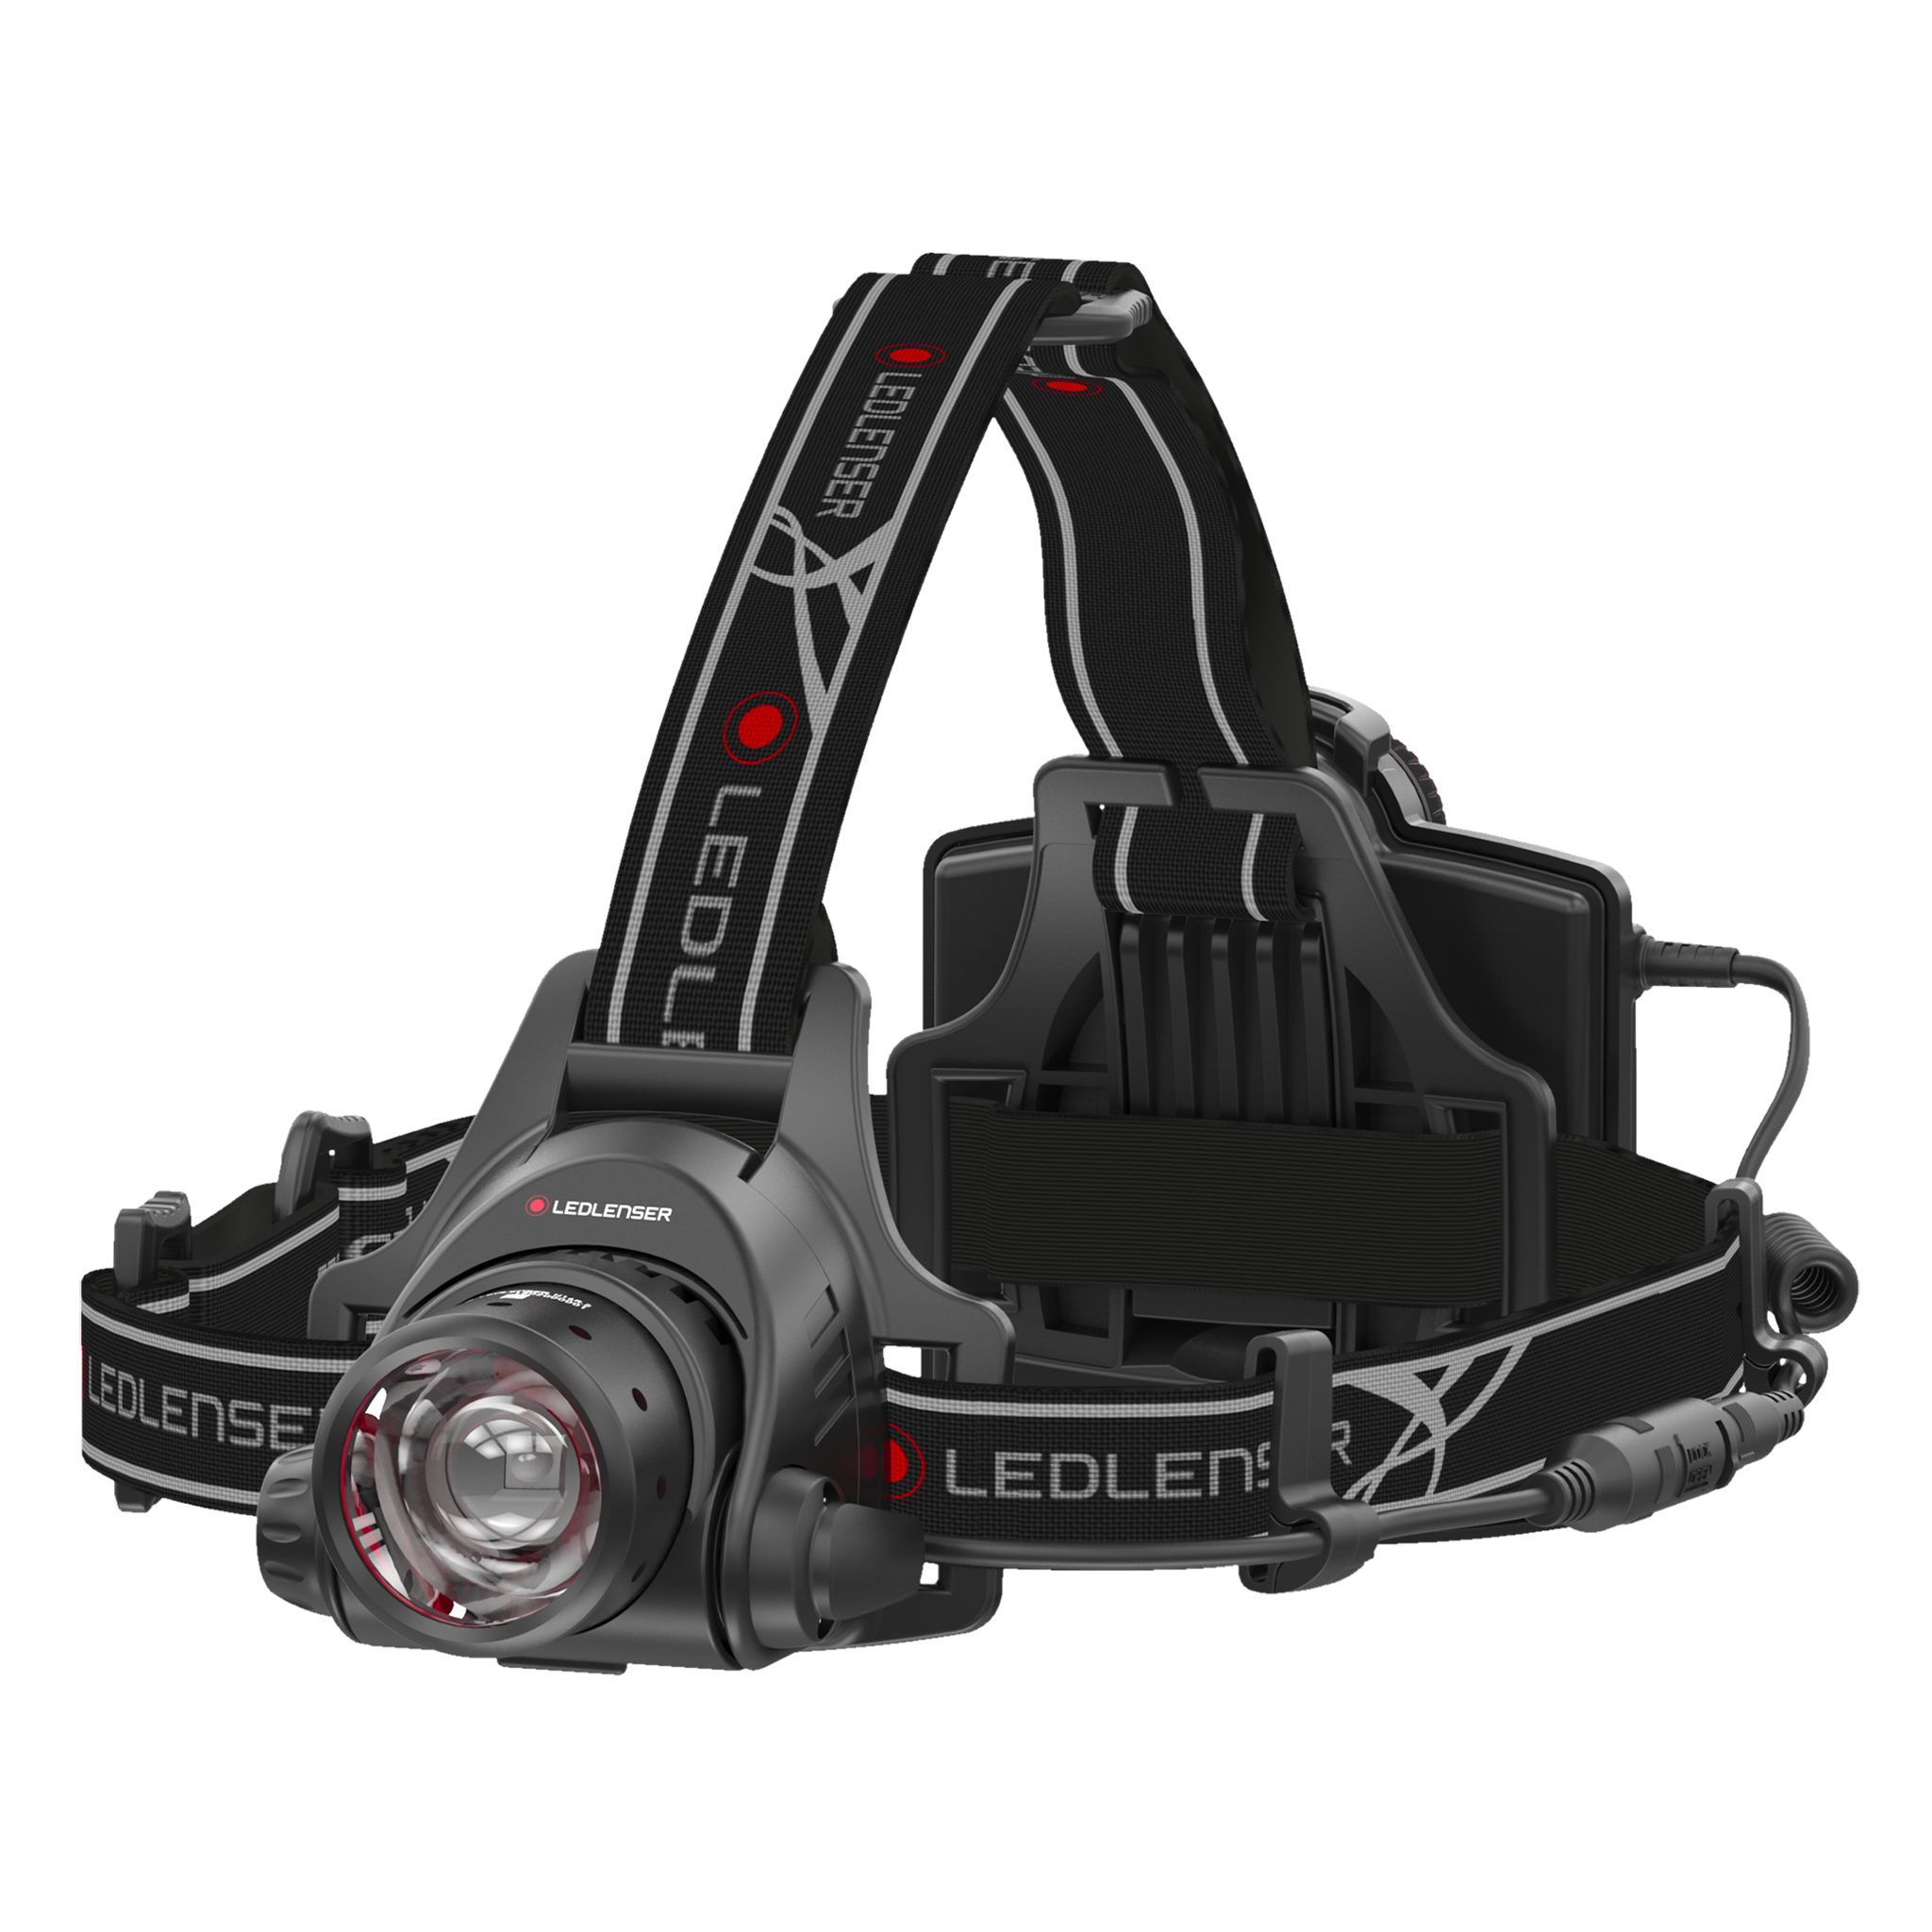 LEDLENSER_ZL7299R_H14R2_HEADLAMP_LAYING_183487b3-c328-4489-a00c-0e23d3af07bb.png